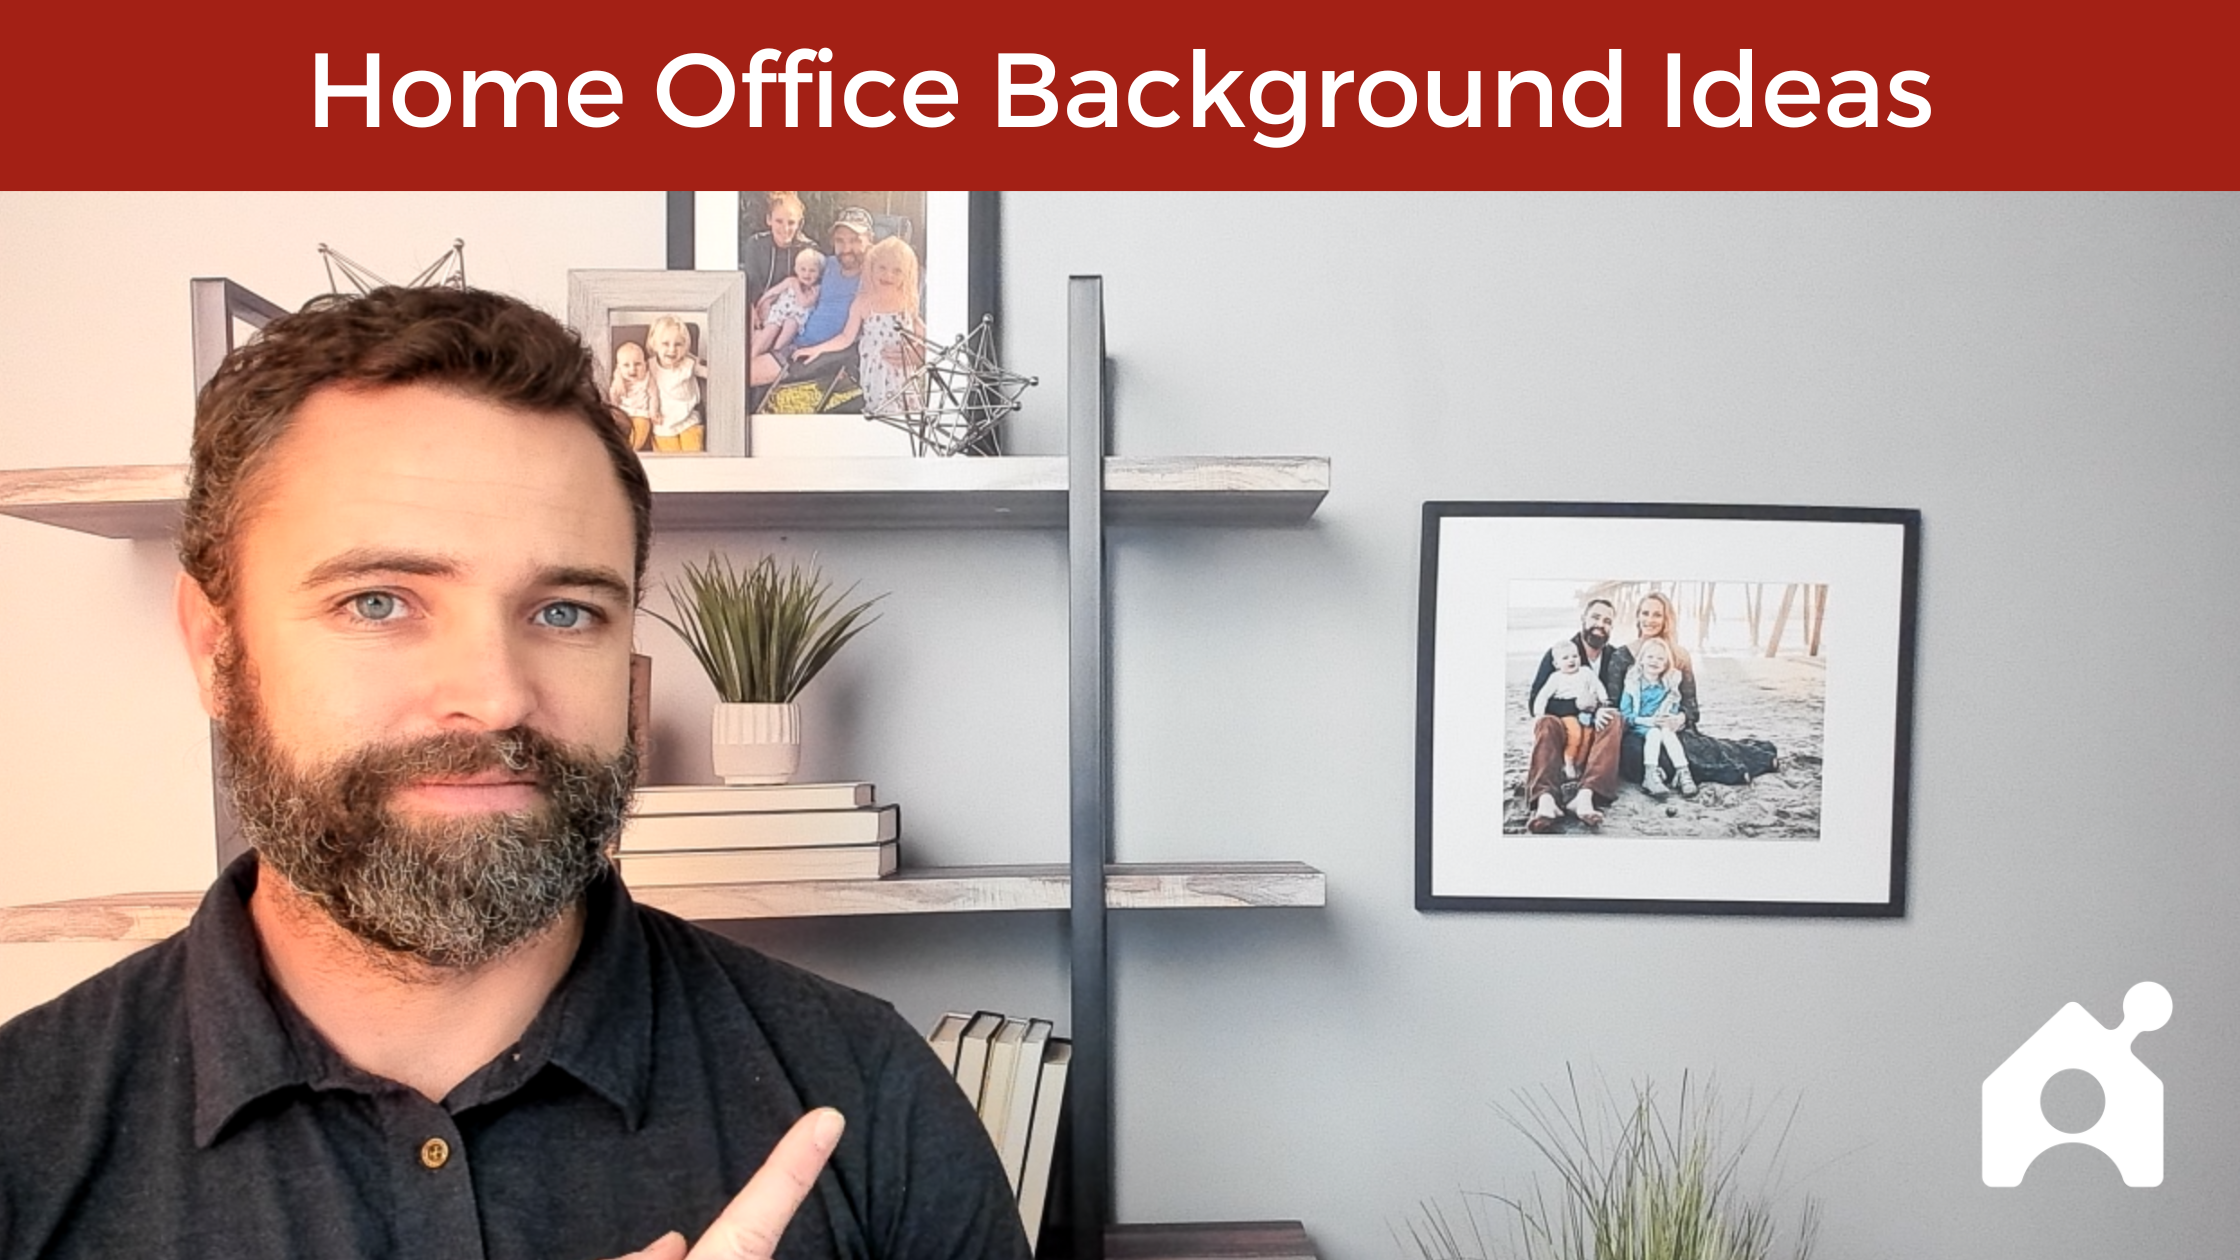 Home Office Background Ideas For Zoom Meetings: Complete Guide